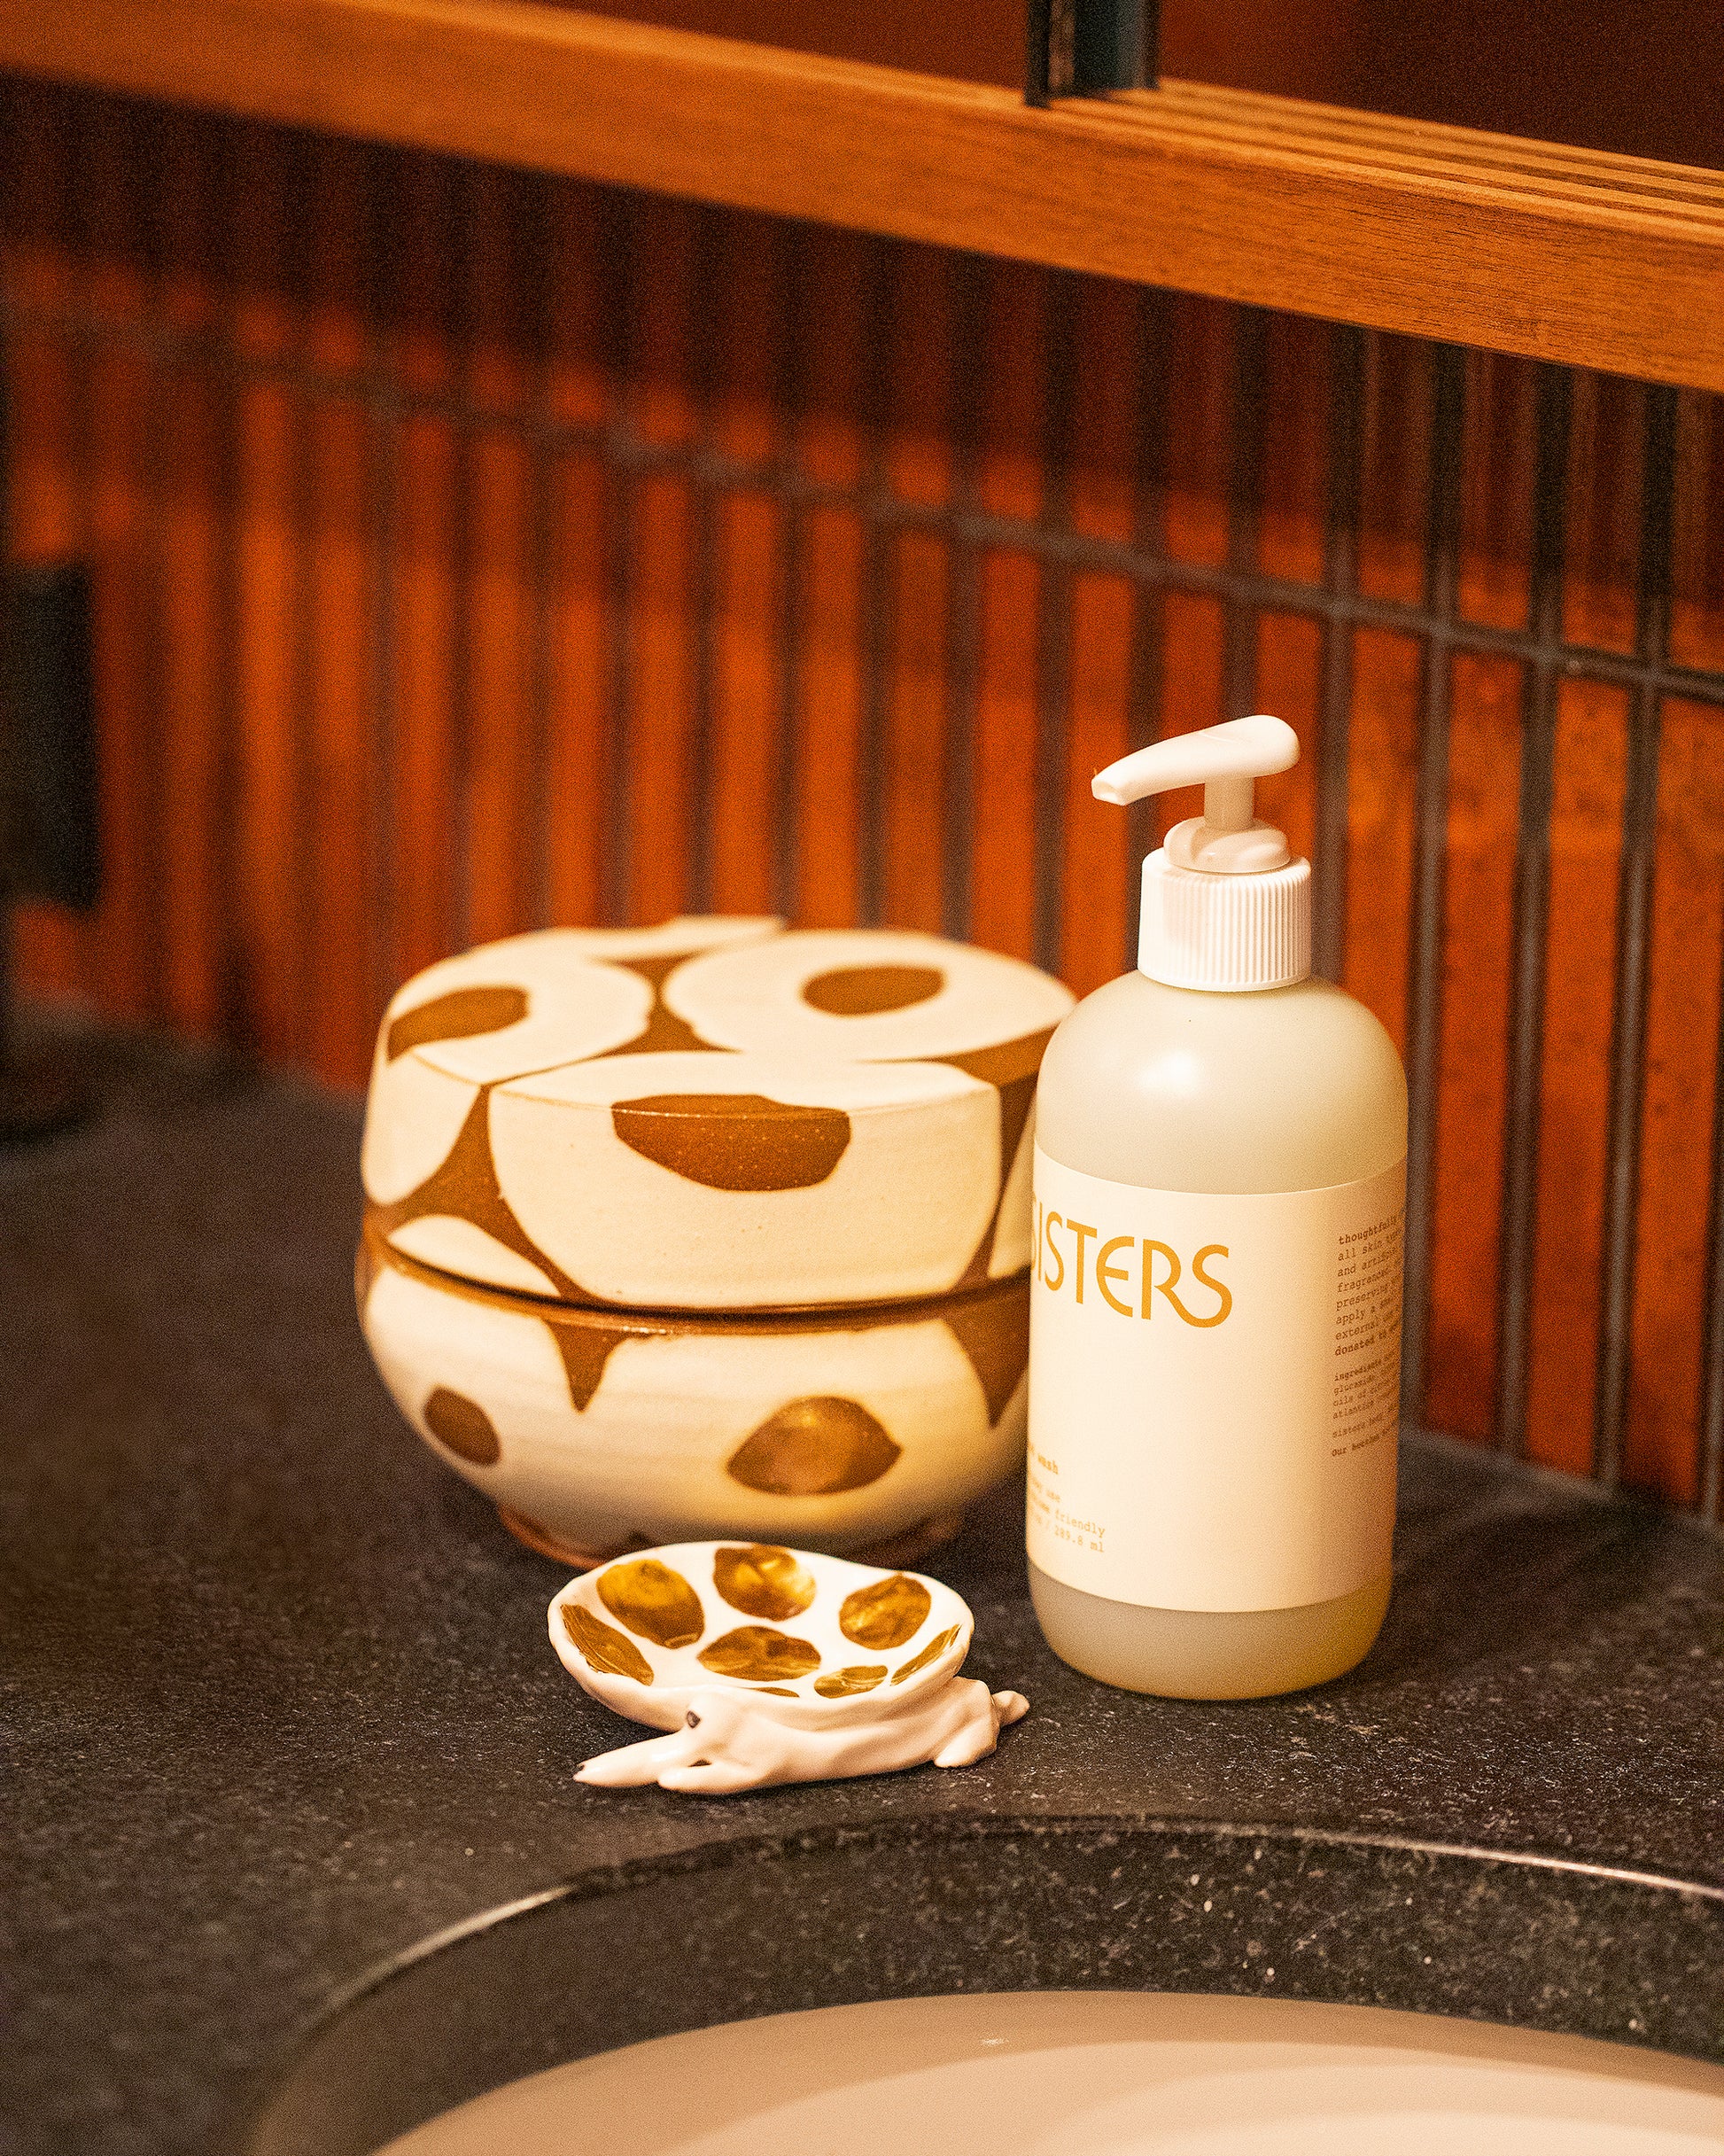 Styled image featuring Jeremy Ayers Circles Salt Box, Sisters Body Hand Wash and Eleonor Boström dish.